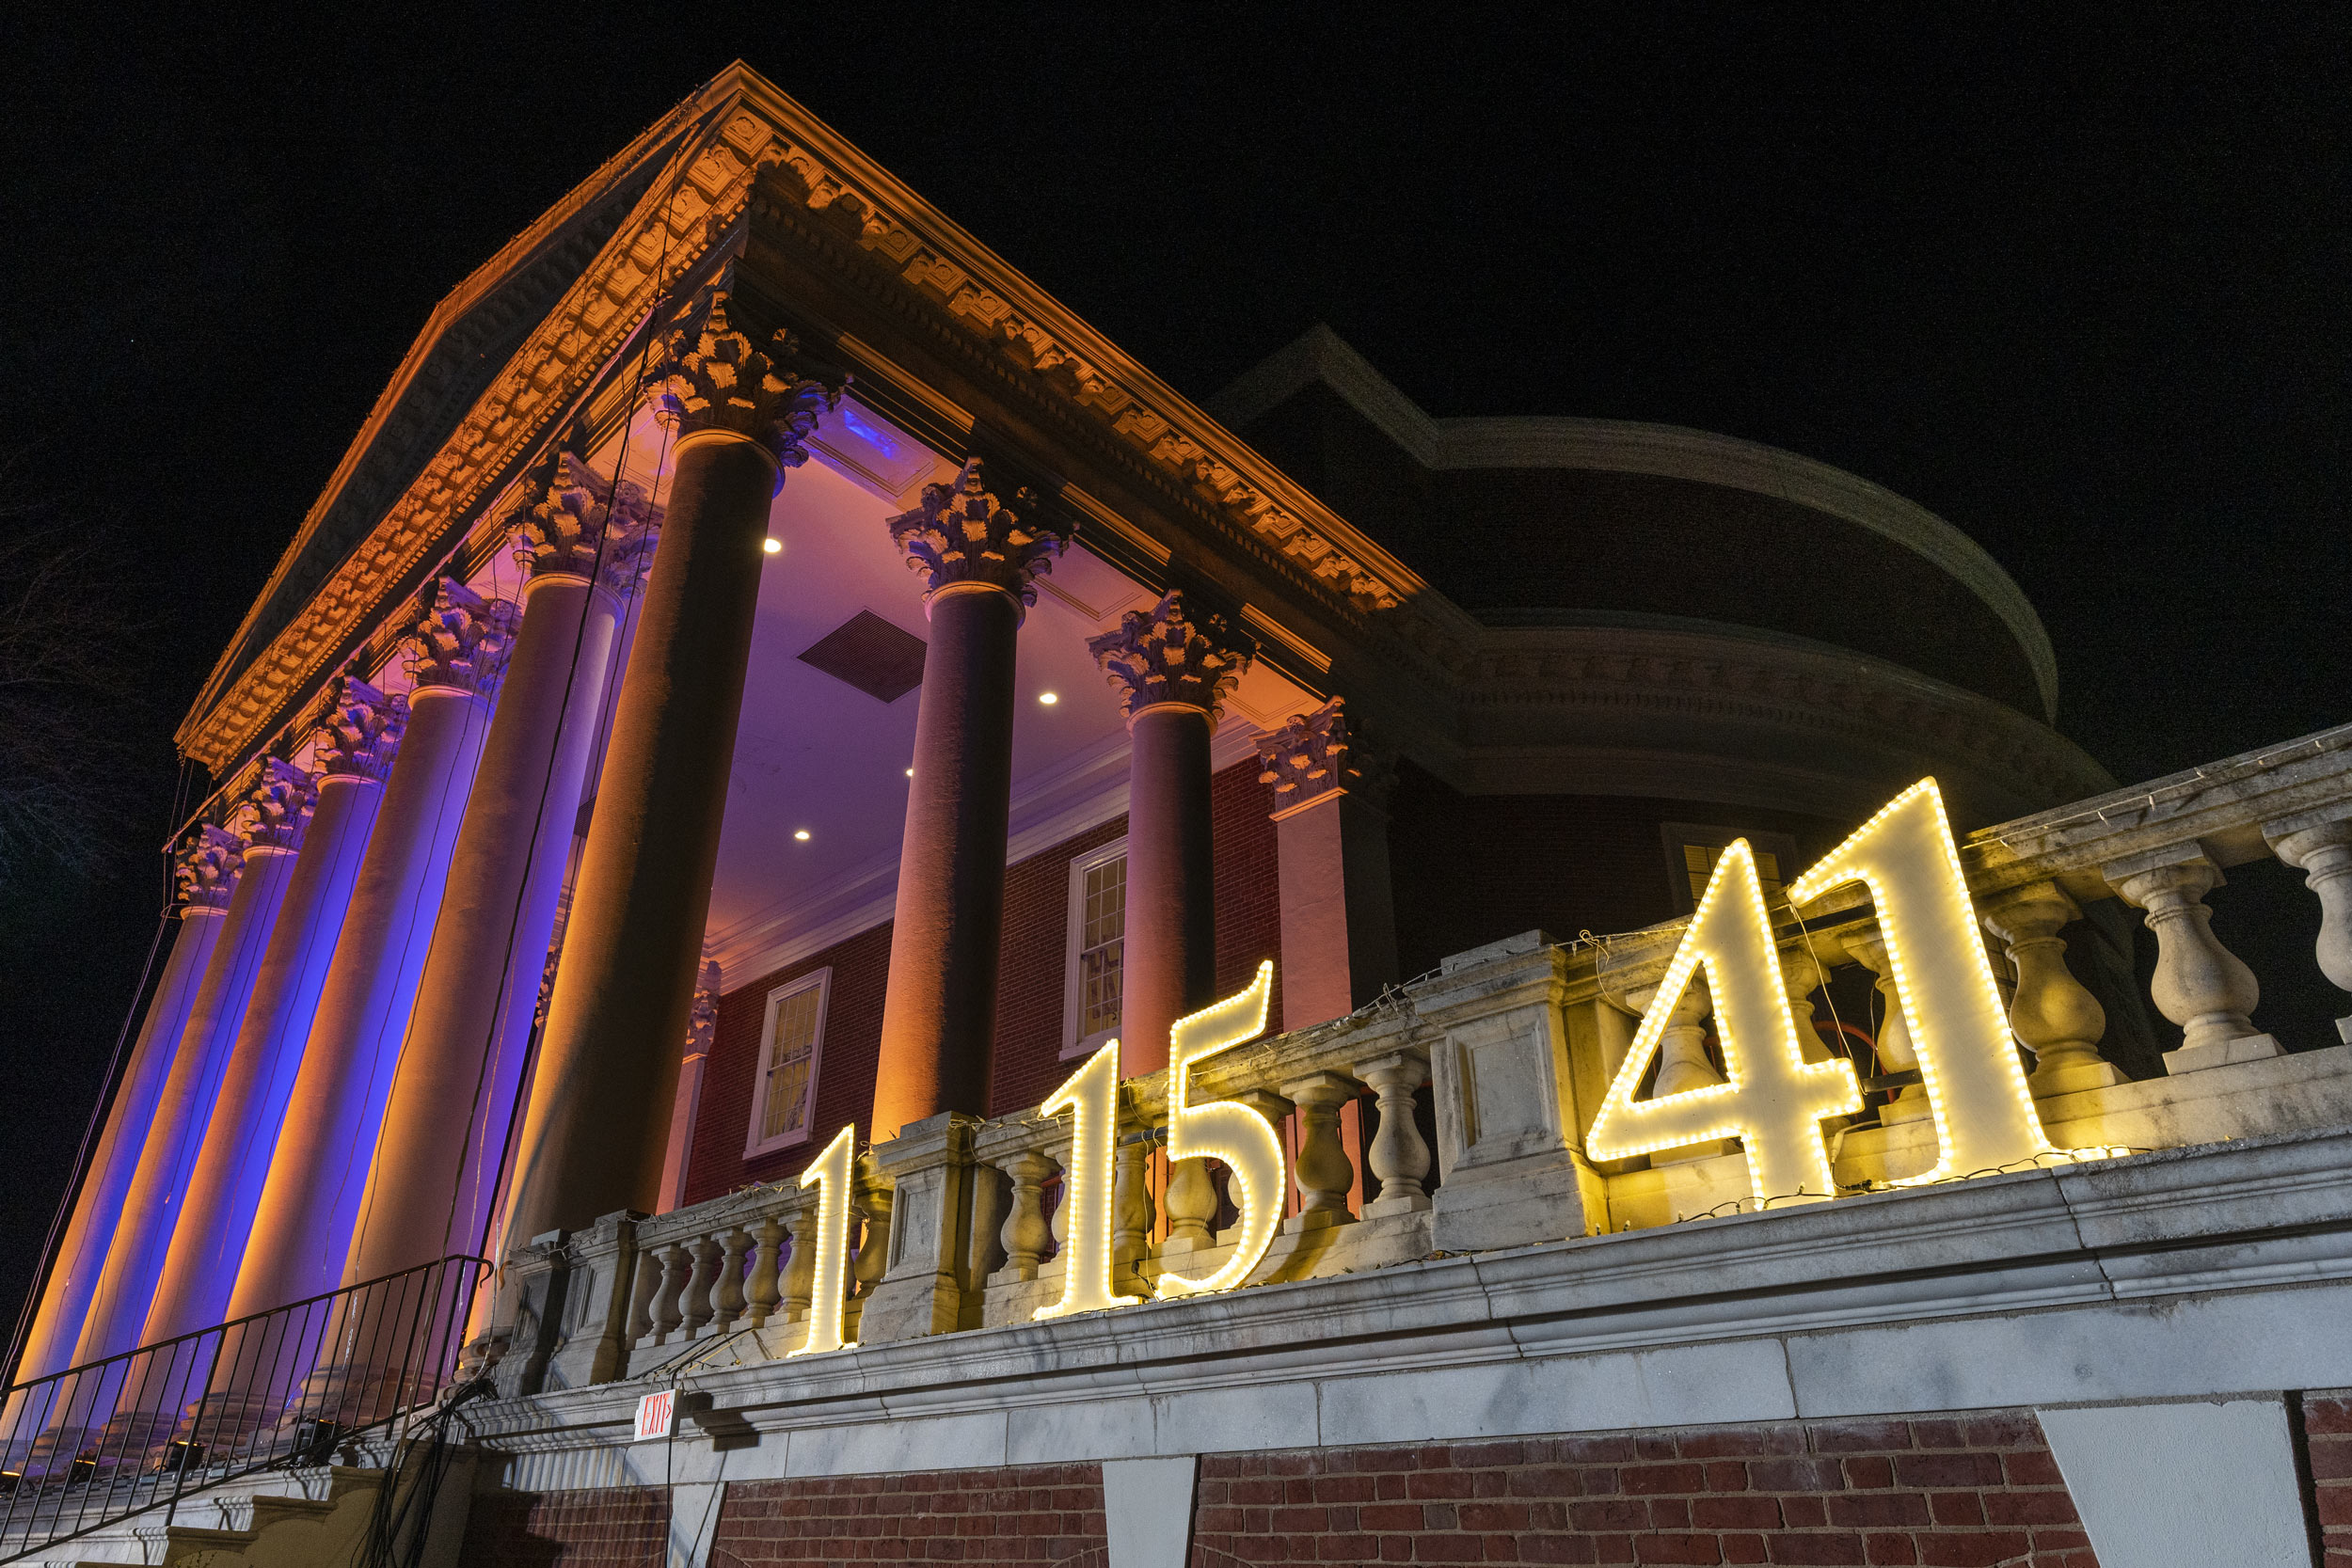 The Rotunda at night with the numbers 1, 15, and 41 as lights